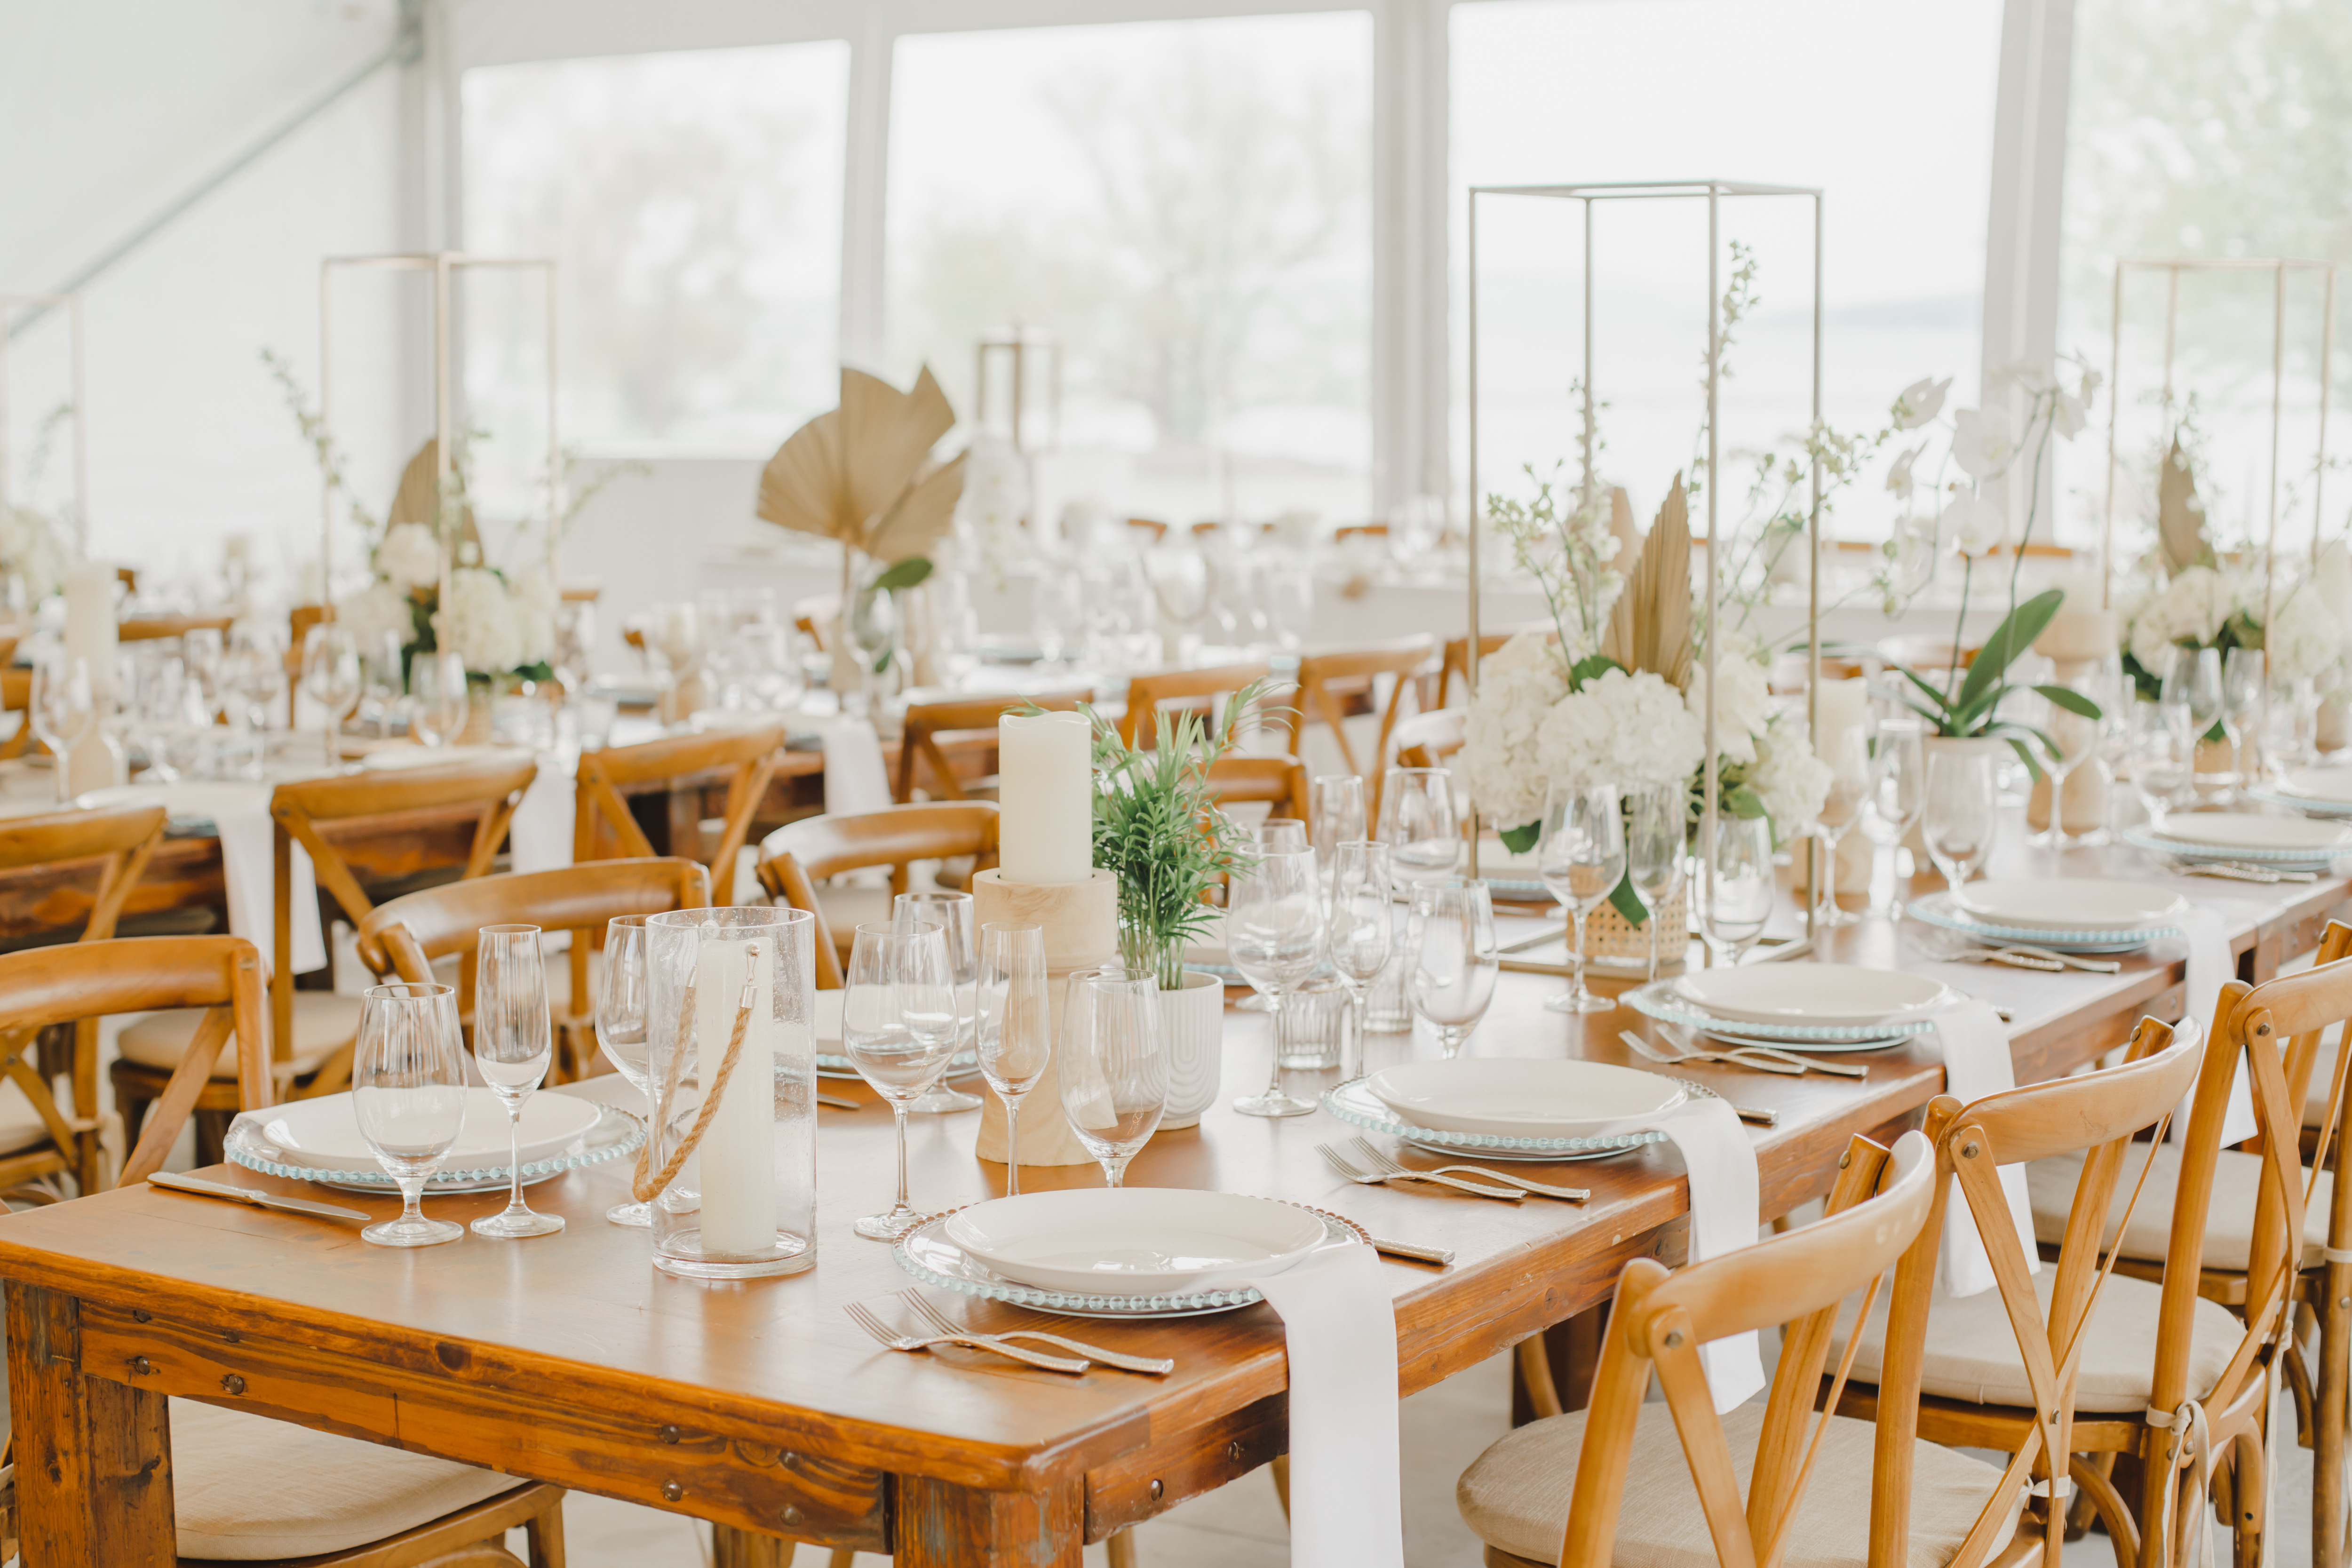 Wedding setup with tables and chairs